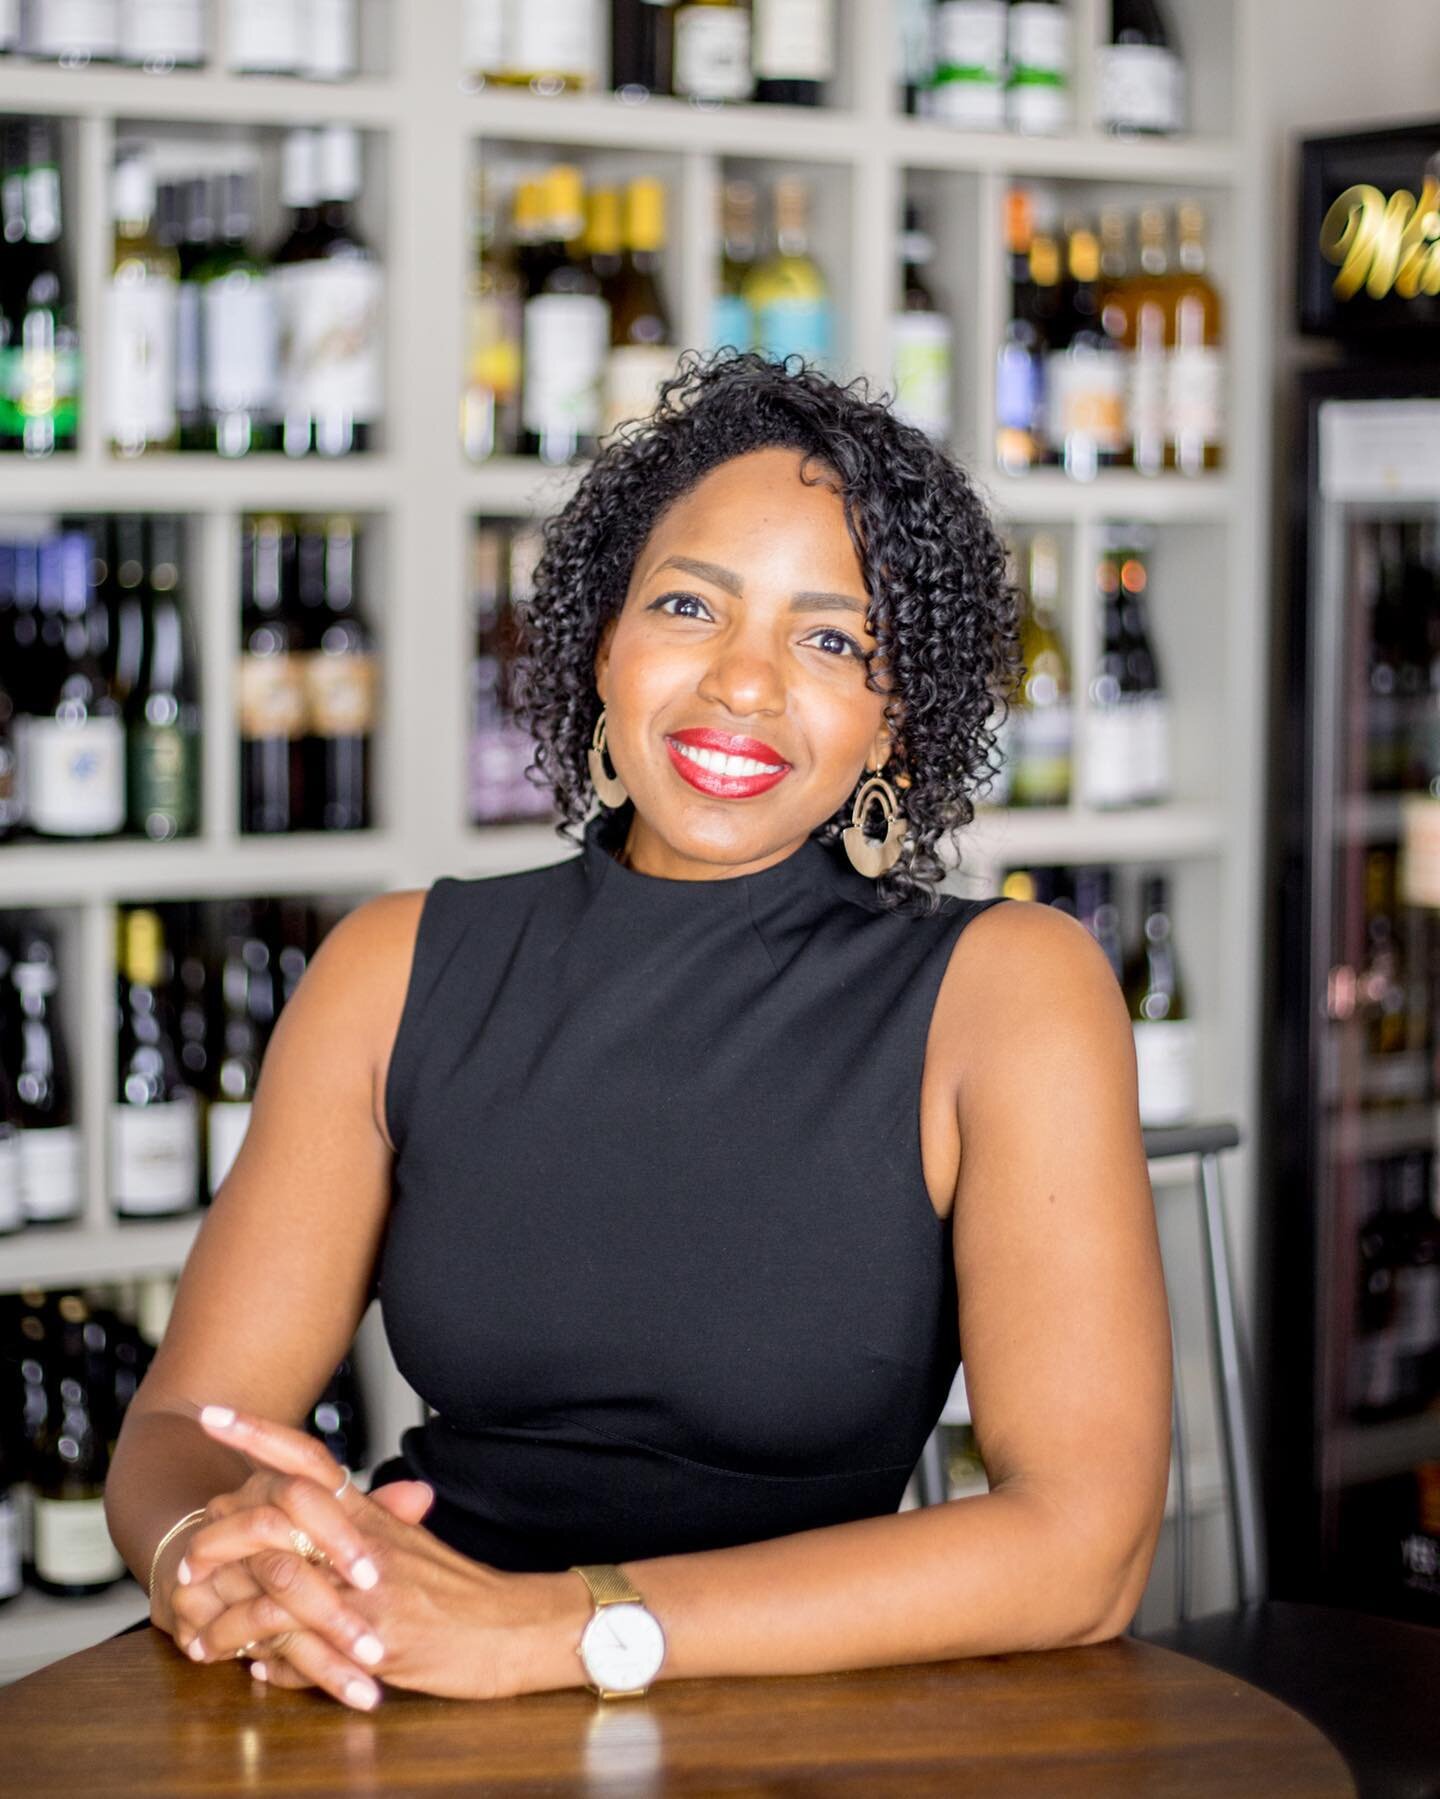 Look who&rsquo;s coming to our Atlanta breakfast! As the founder of @3parkswine, @sarahpierre1 is dedicated to supporting small, organic, biodynamic, natural wine producers. Sarah will join our conversation about building community through food. 

Sa